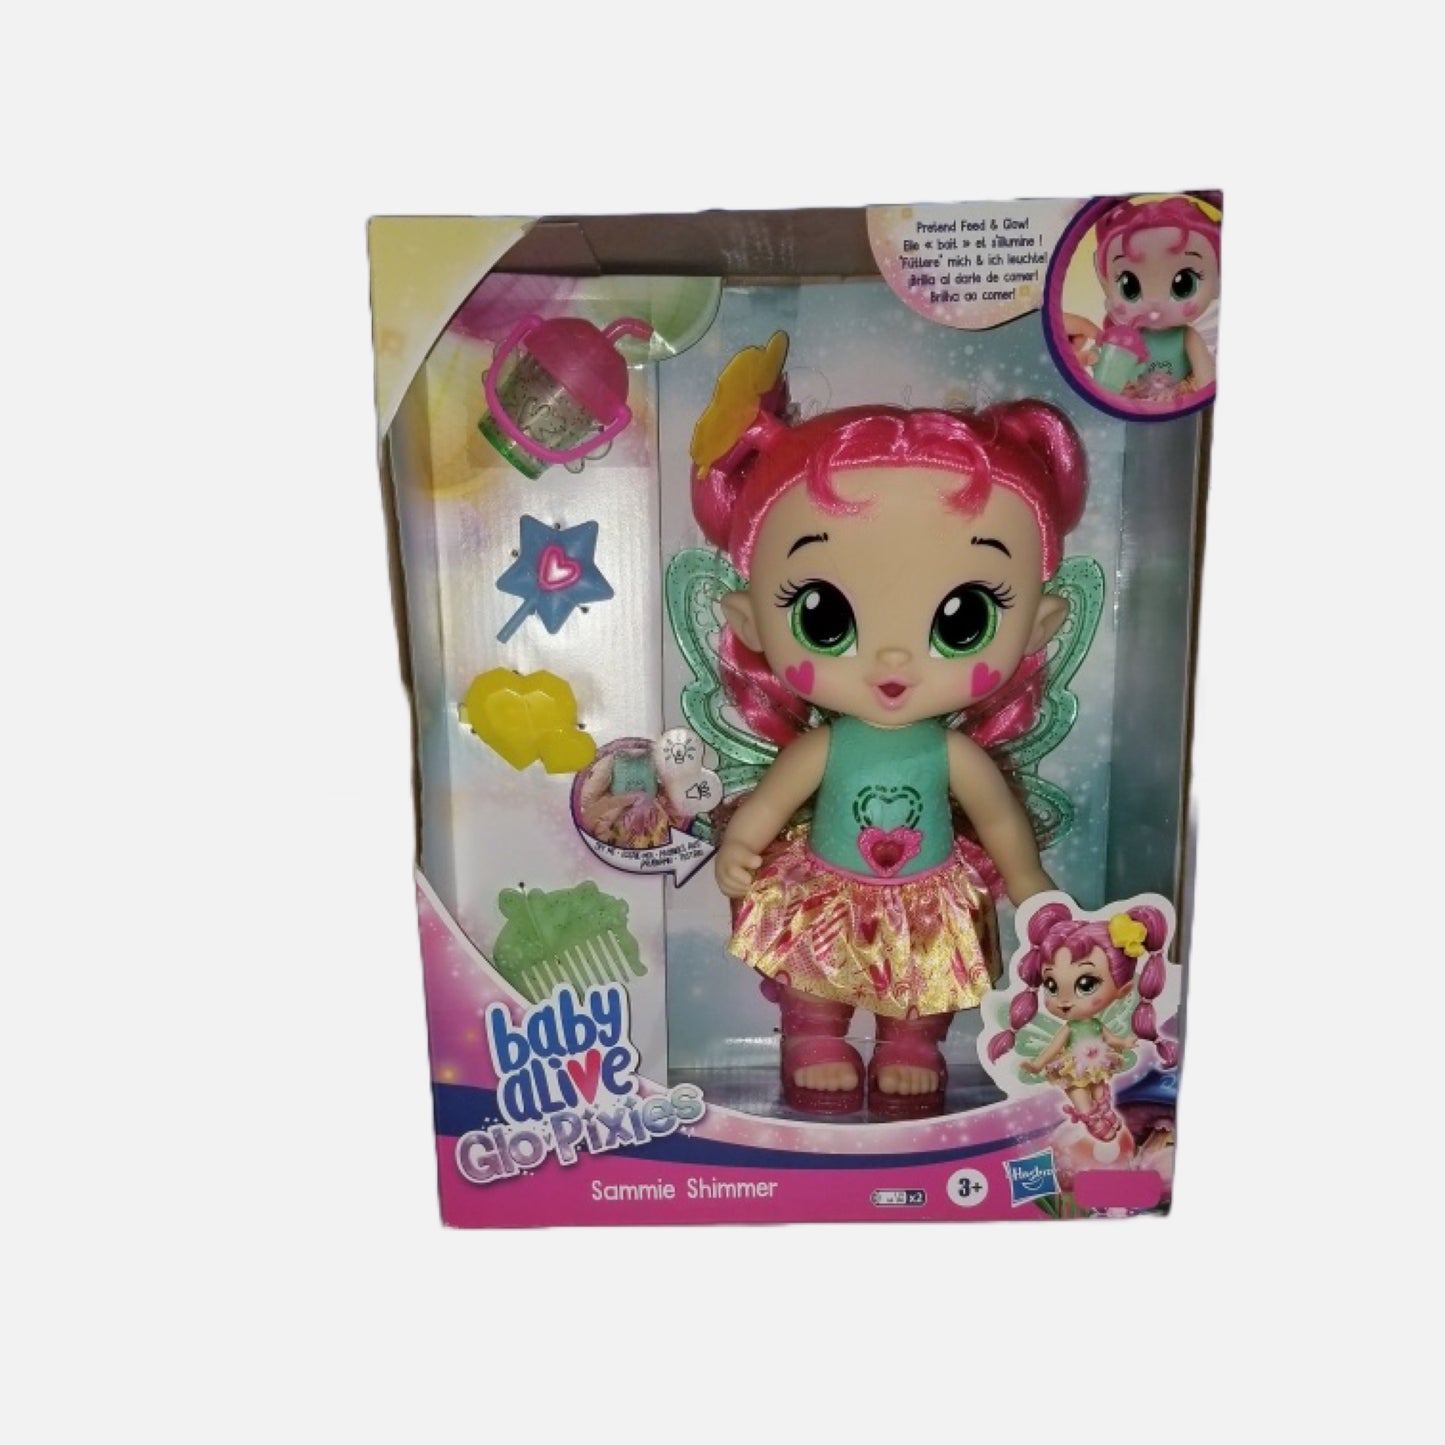 Hasbro Baby Alive Glo Pixies Sammie Shimmer